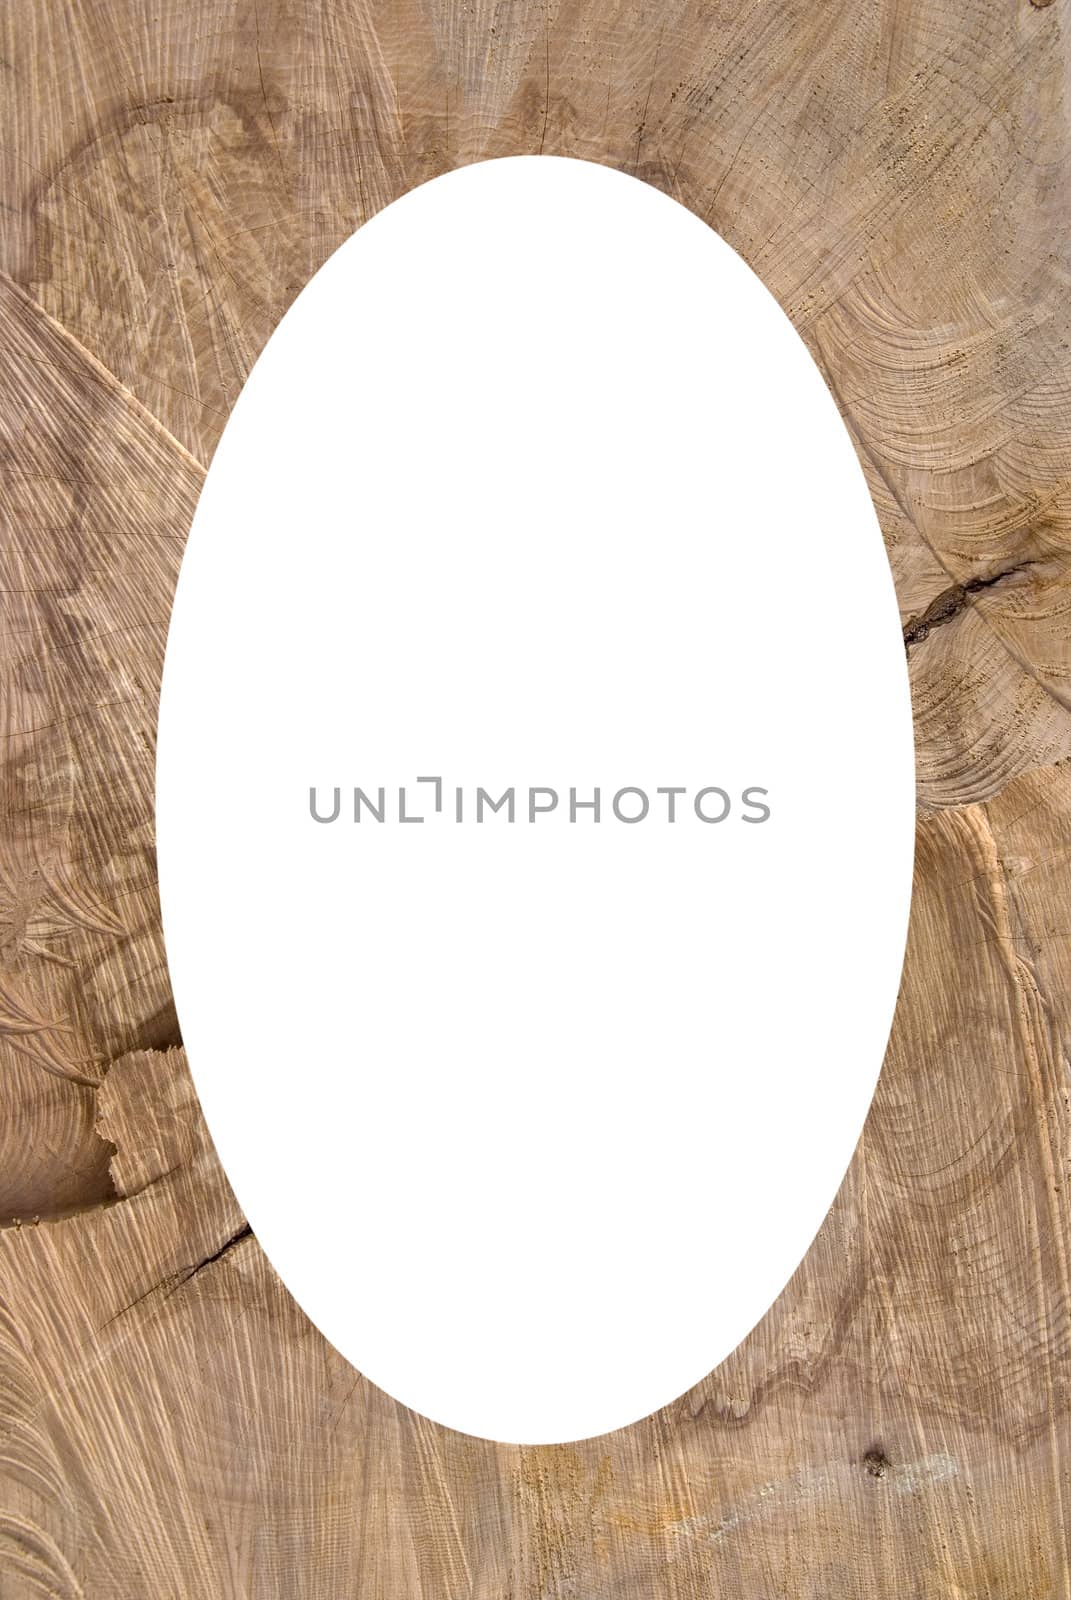 Truncated wood trunk section frame isolated oval by sauletas